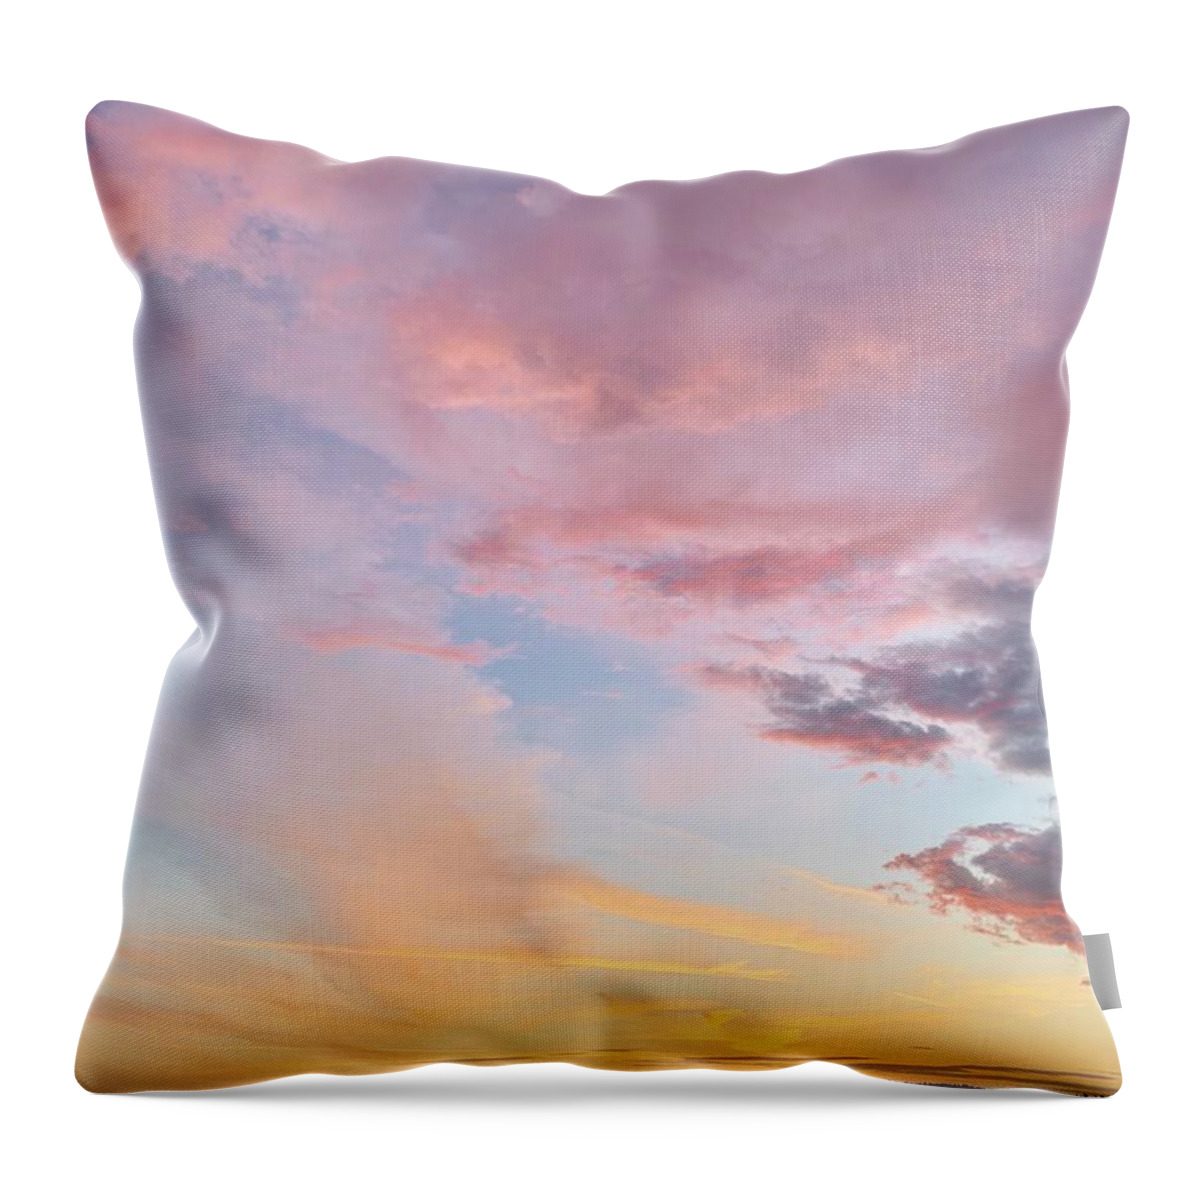 Photography Throw Pillow featuring the photograph Homeward Bound by Sean Griffin